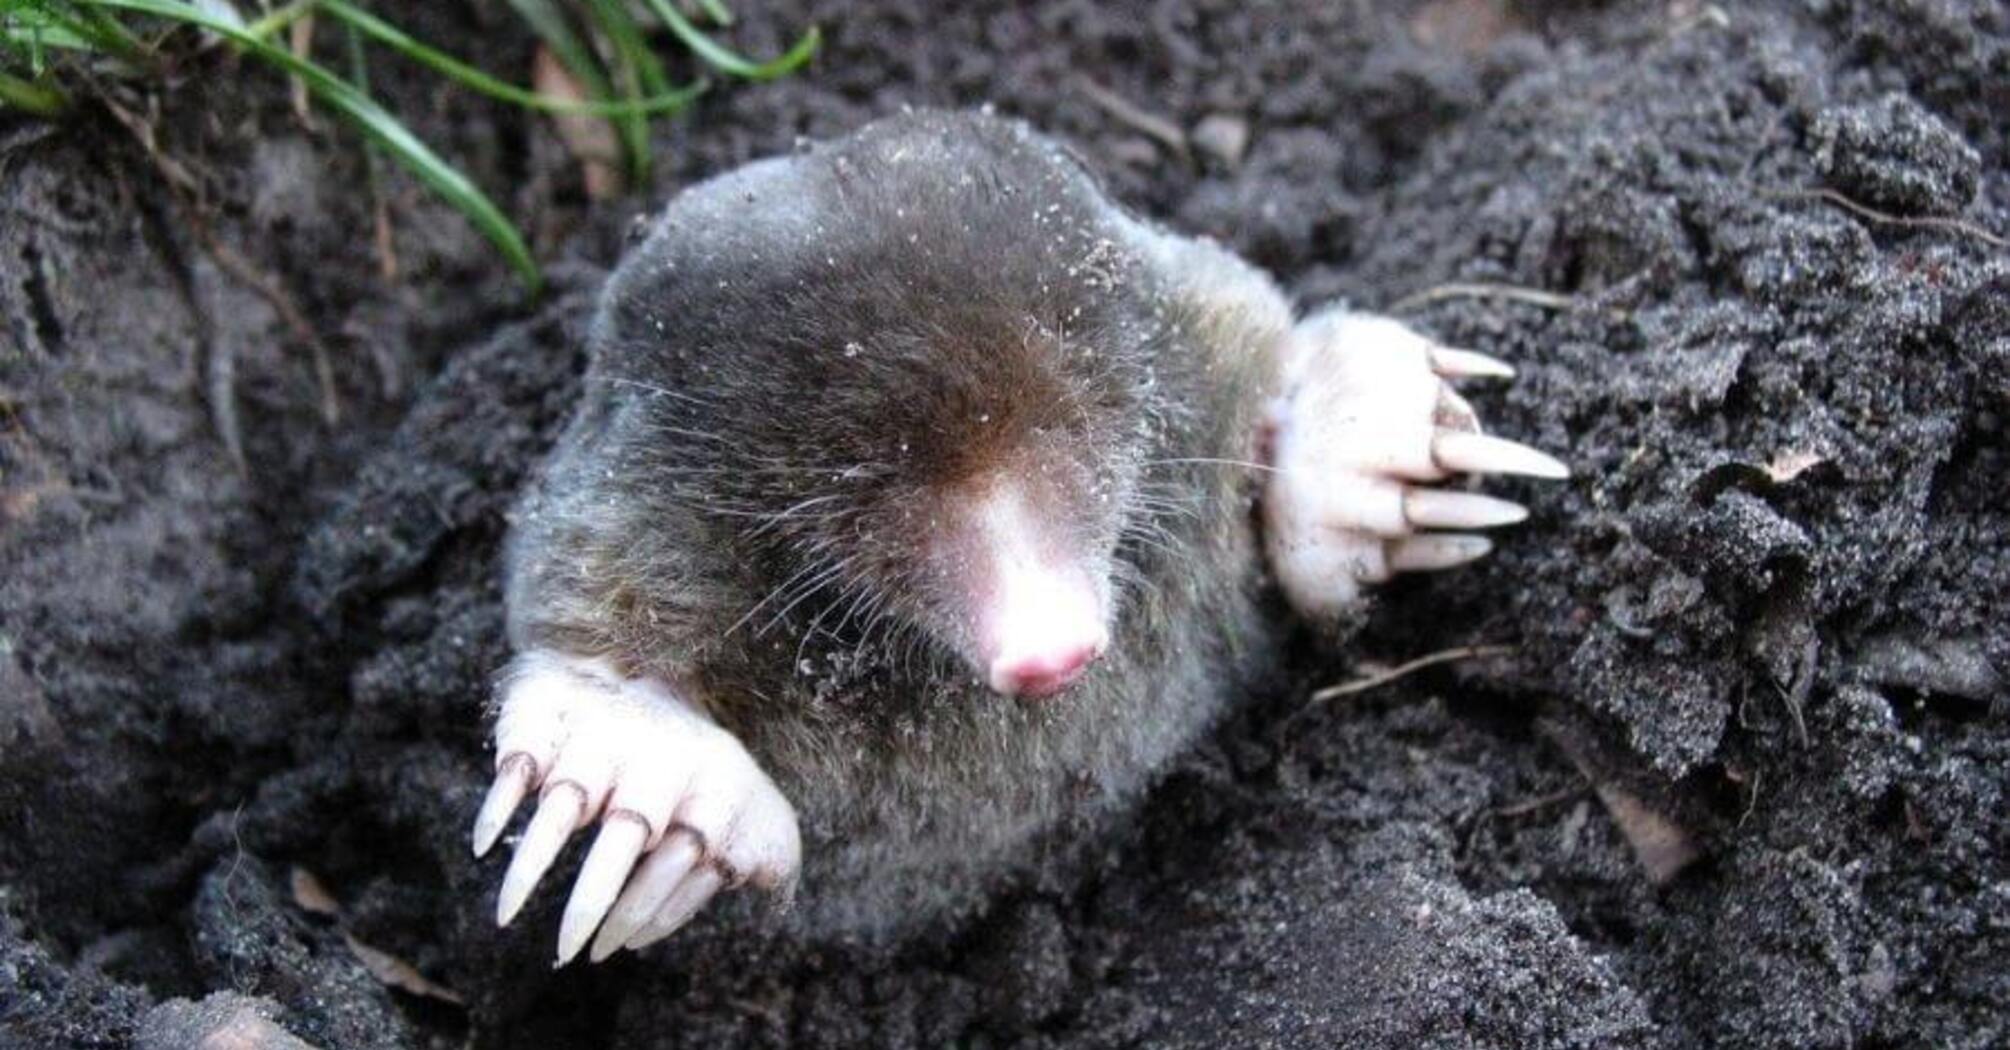 How to get rid of moles in the garden